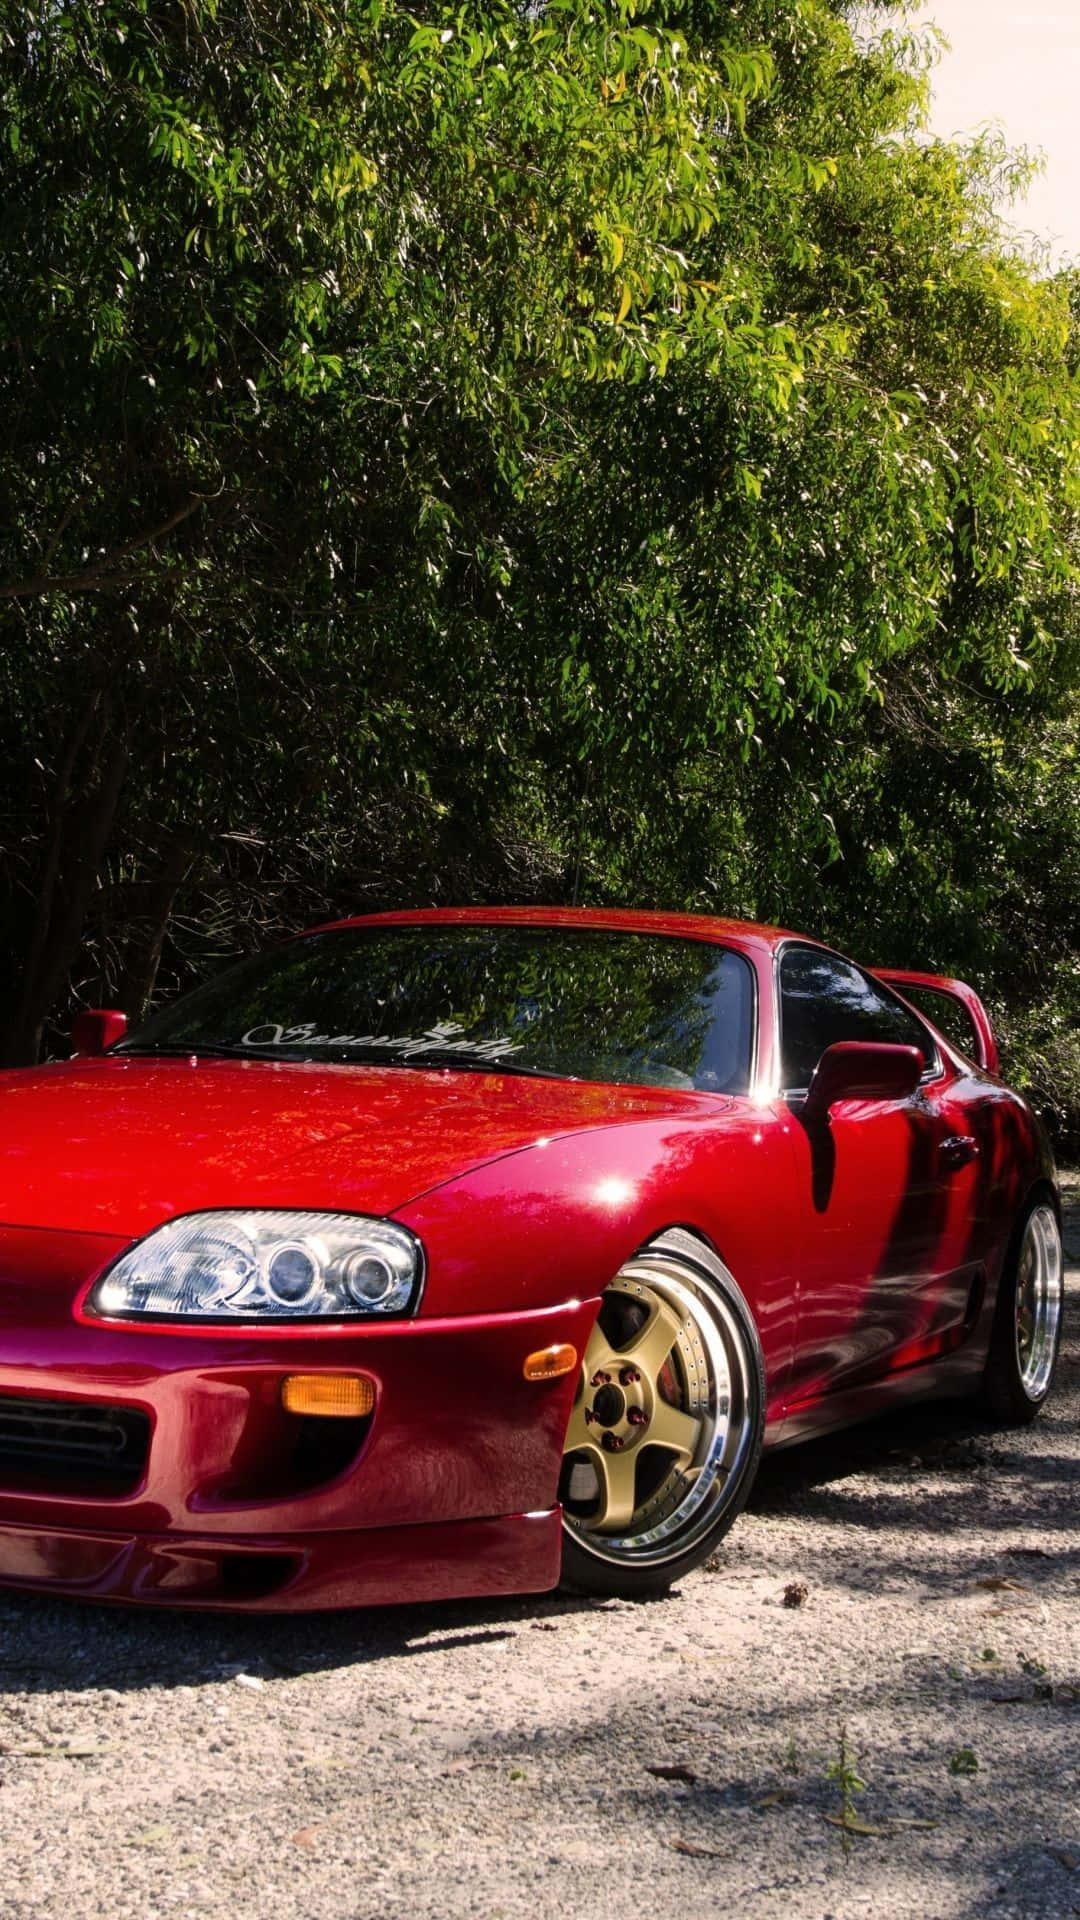 Look at the beats of this gorgeous red car! Wallpaper